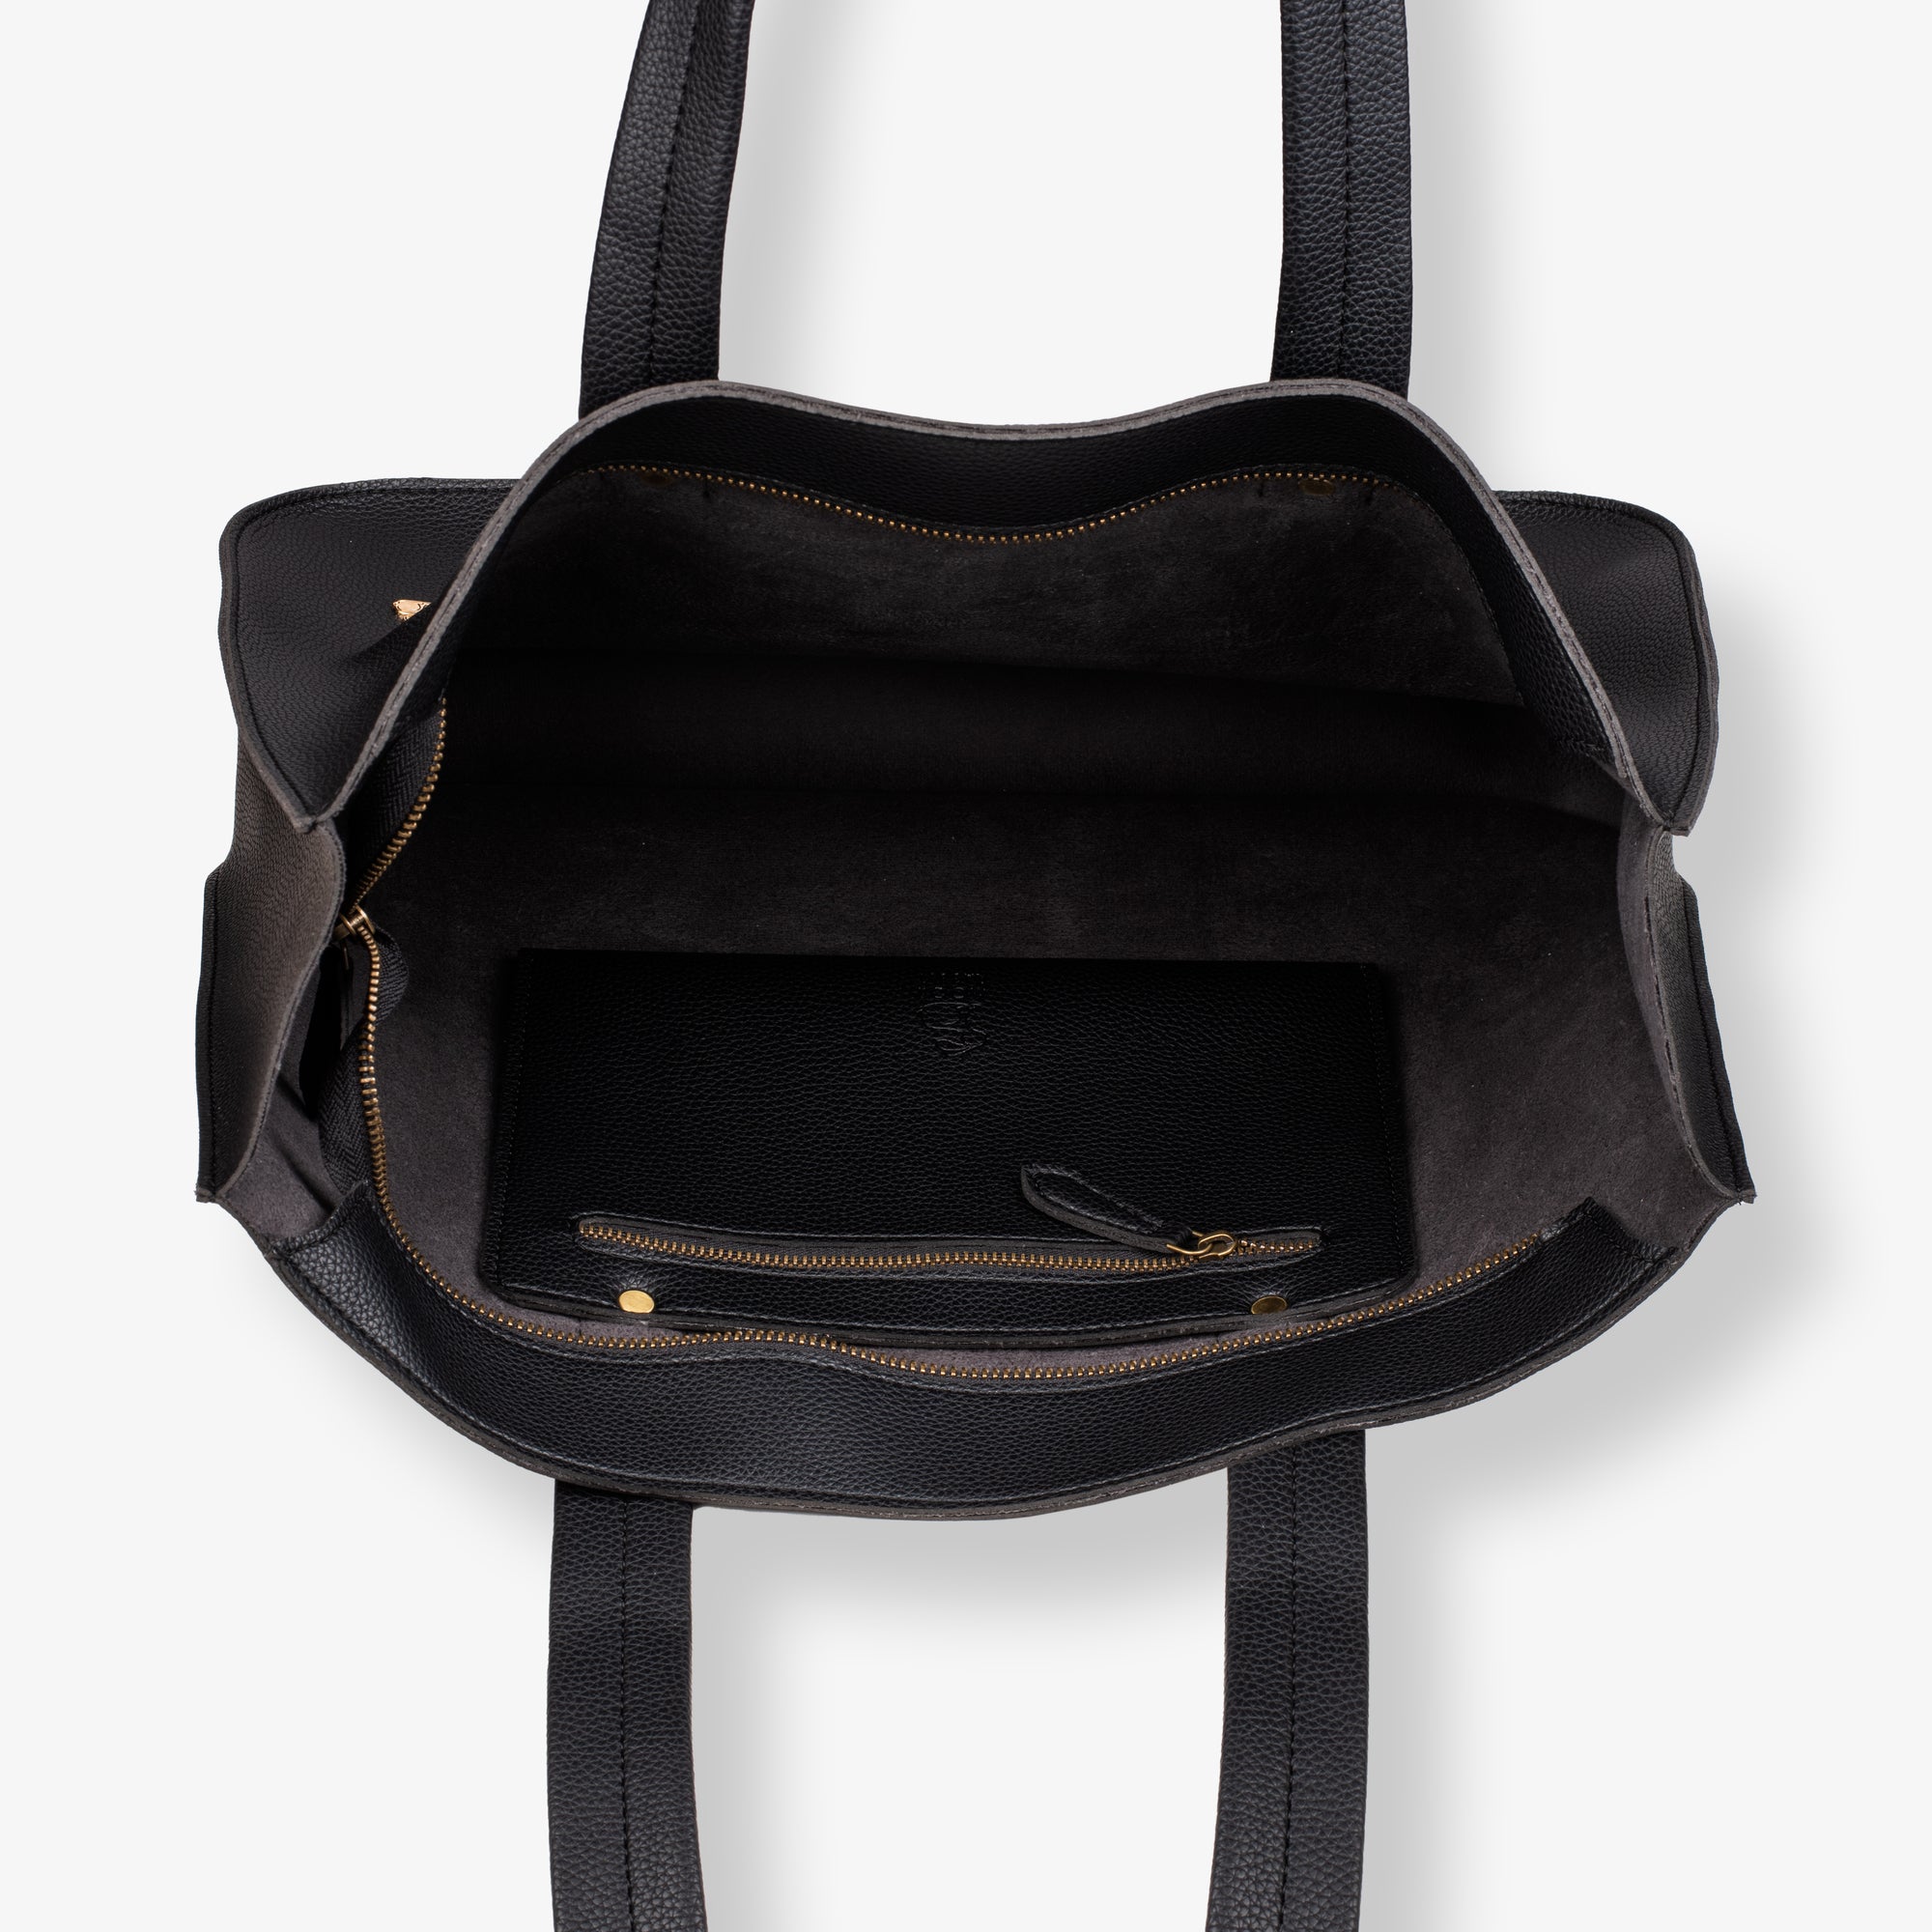 faux leather tote bag